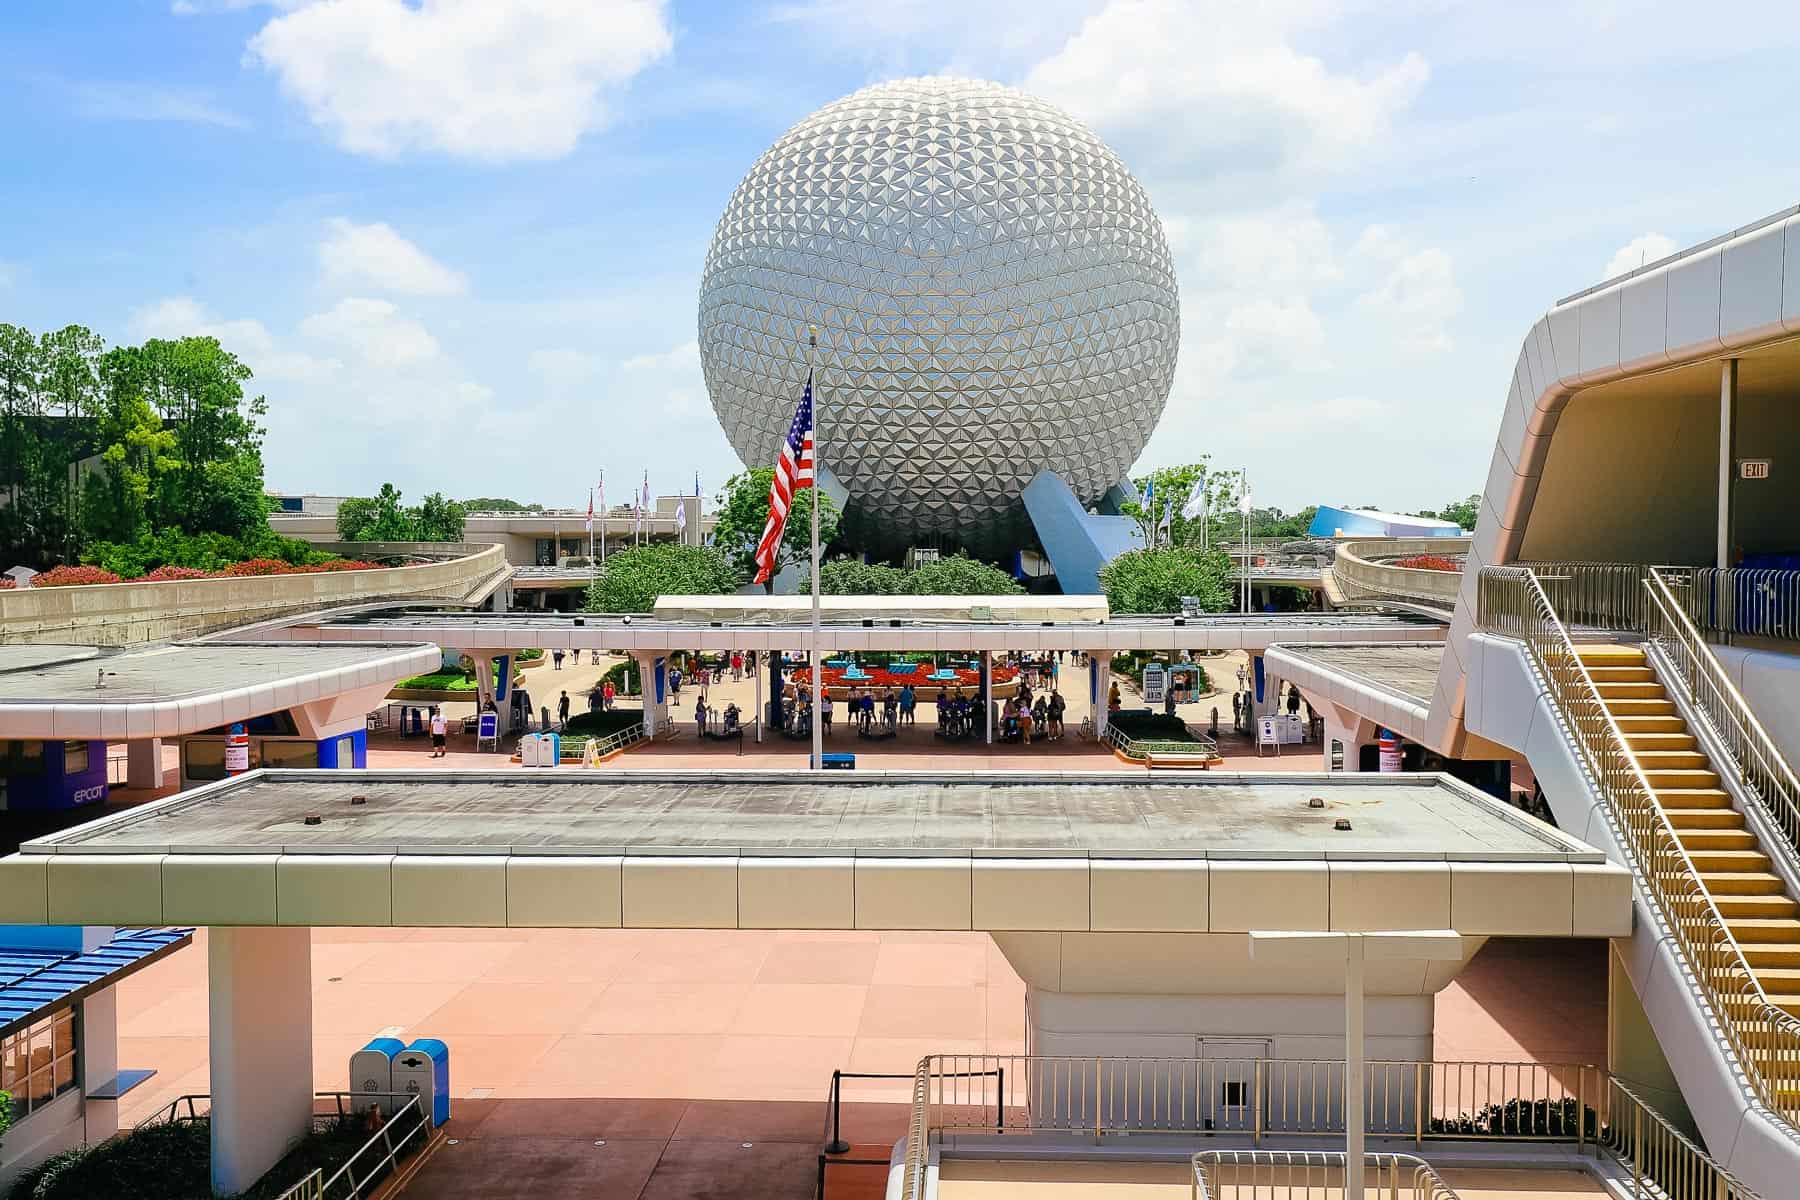 A view of Spaceship Earth from the monorail platform at Epcot. 